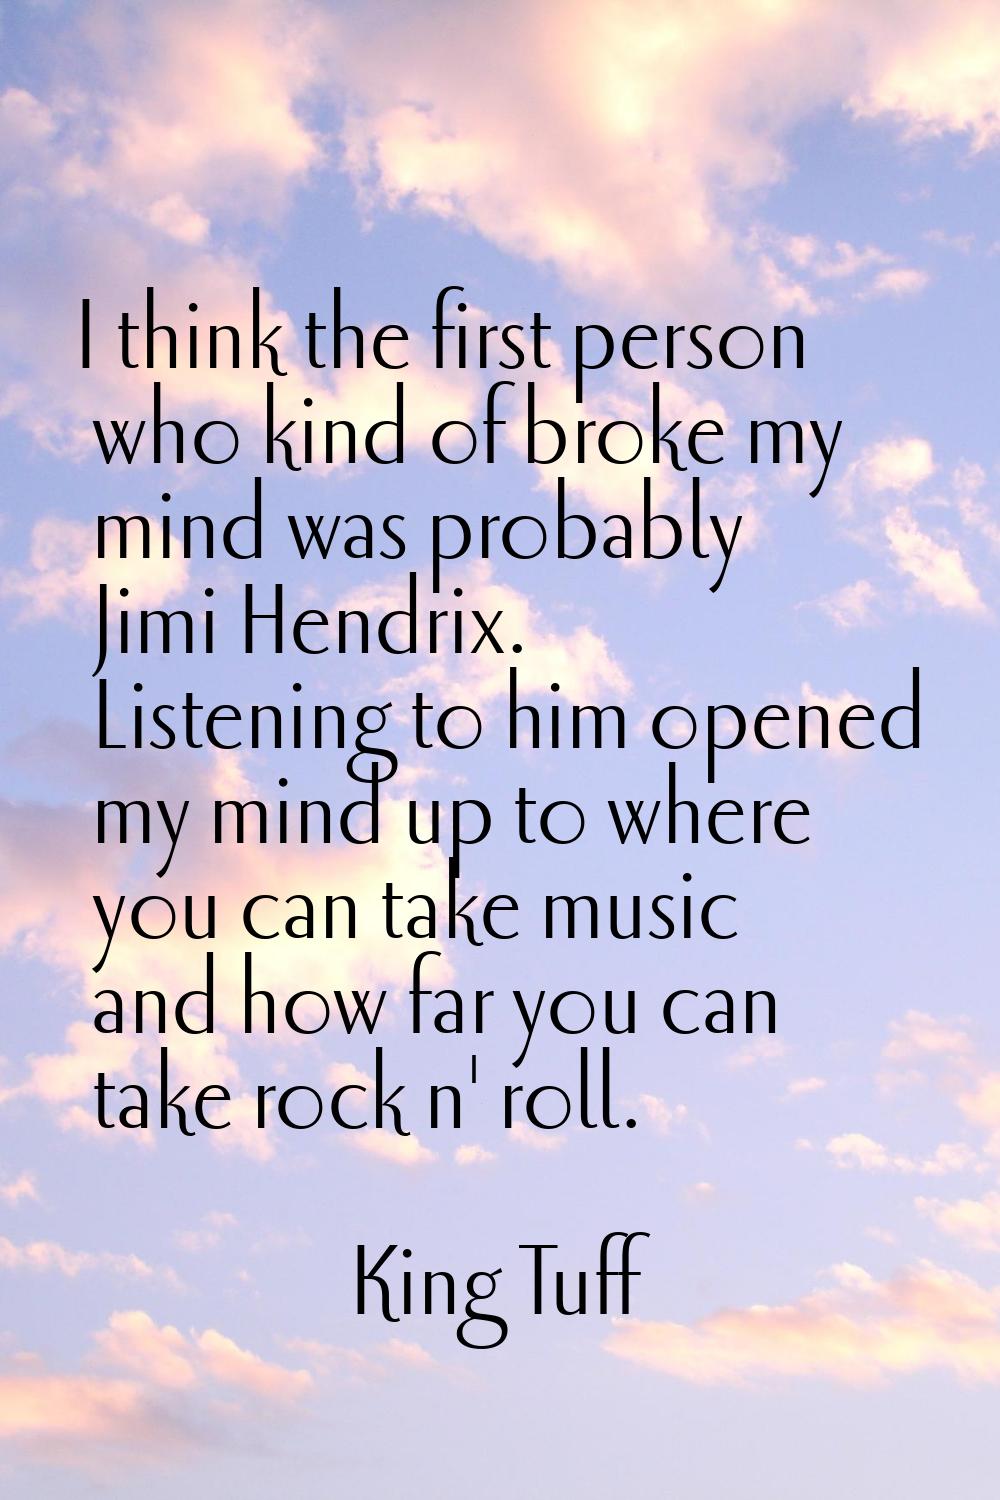 I think the first person who kind of broke my mind was probably Jimi Hendrix. Listening to him open